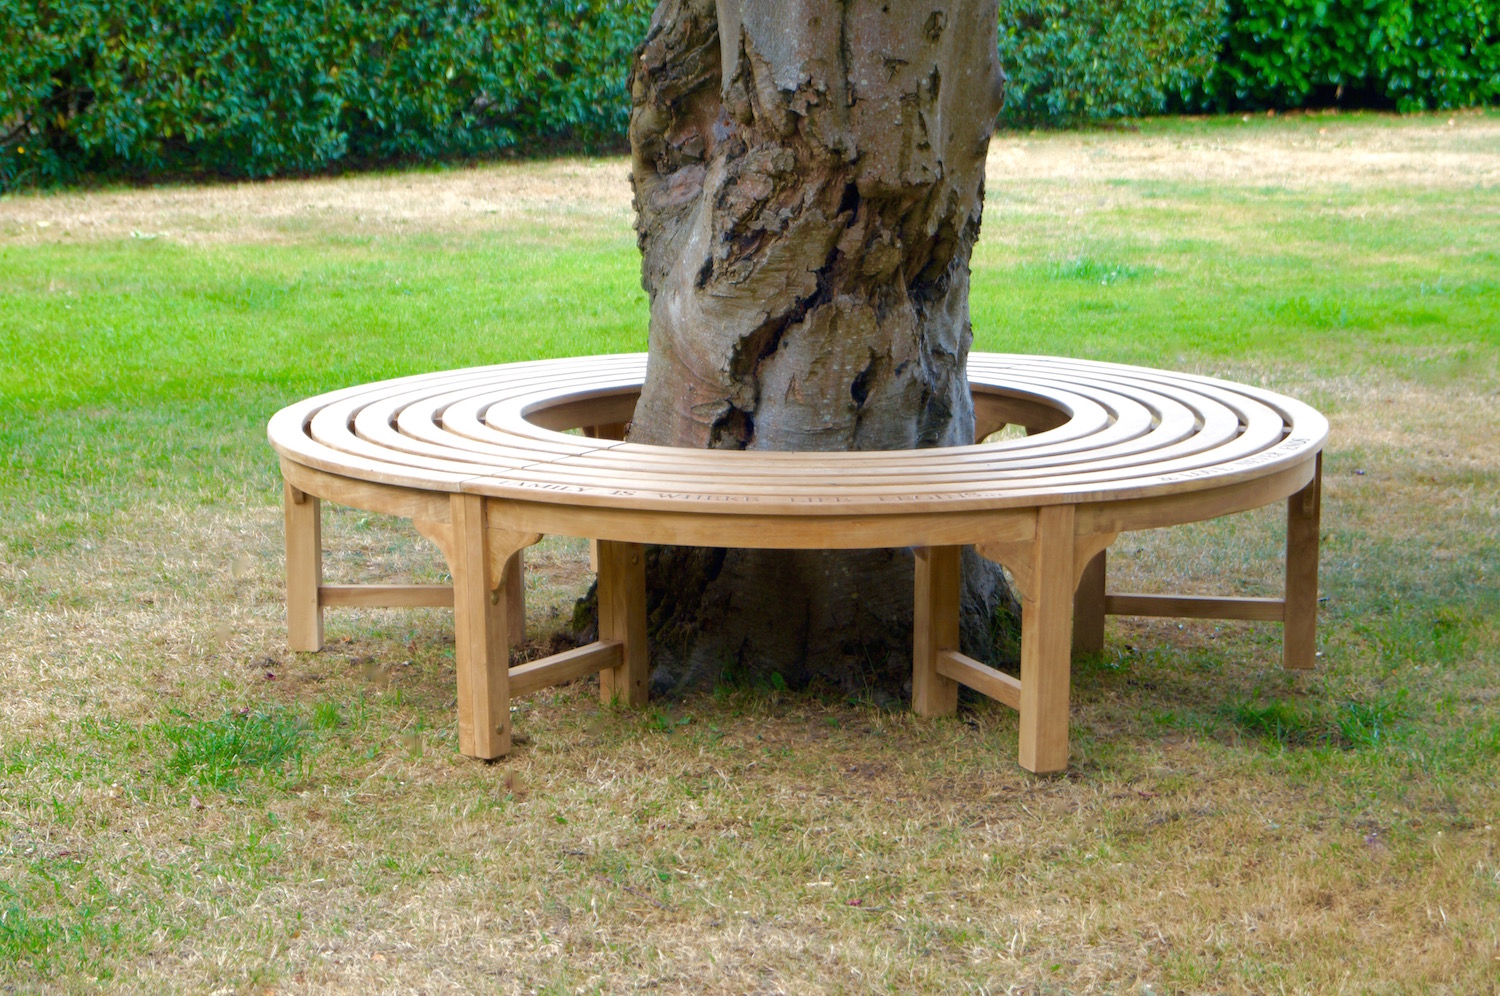 Engraved Wooden Circular Bench, Rounded Bench Seating